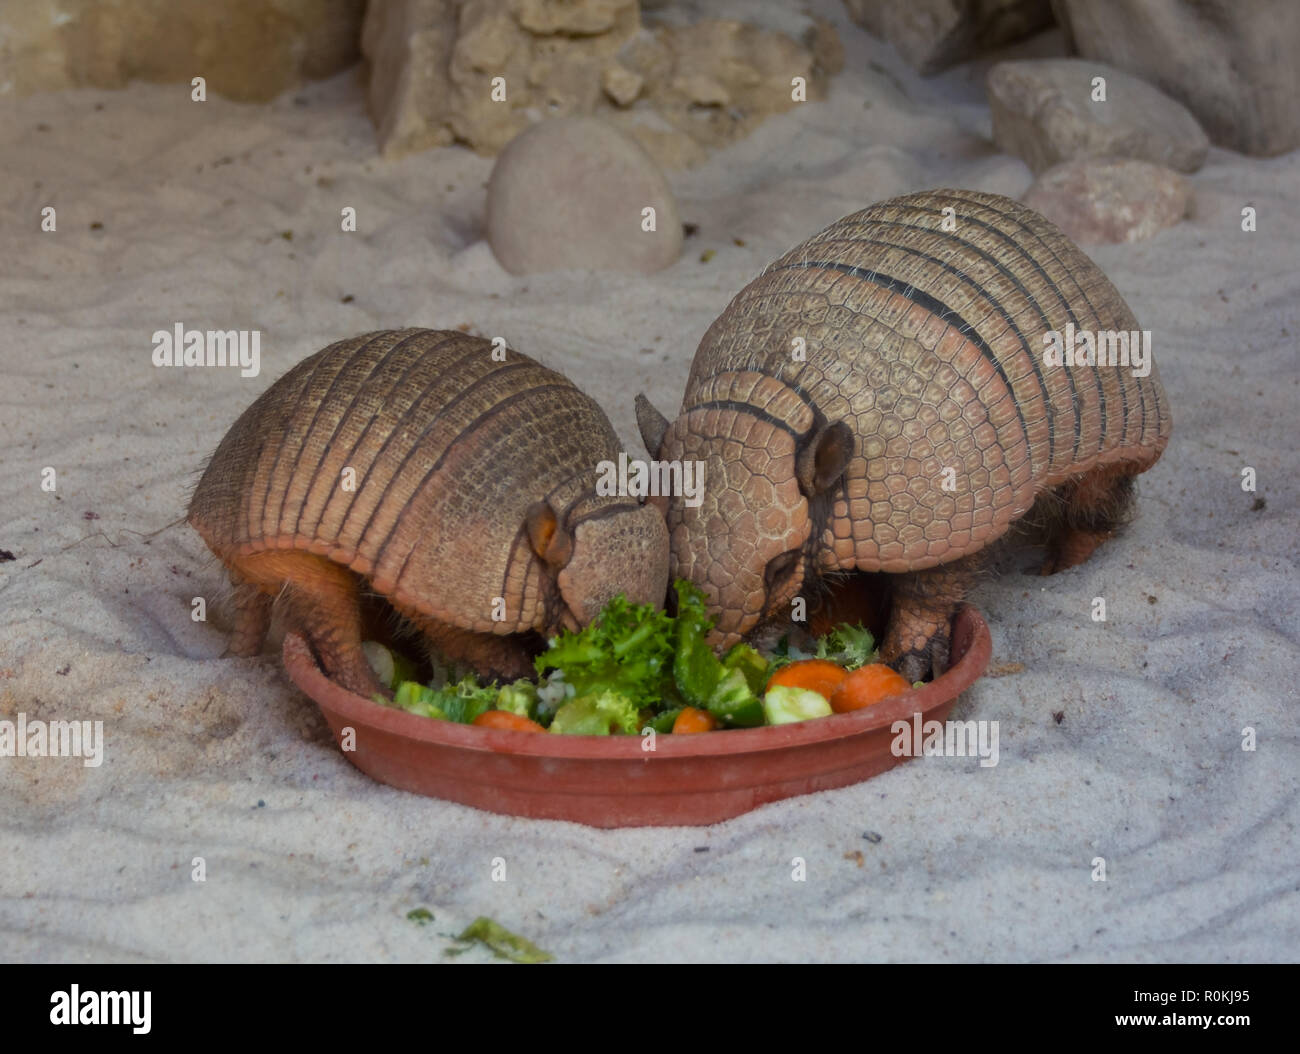 two six-banded armadillos eating vegetables from the same bowl Stock Photo